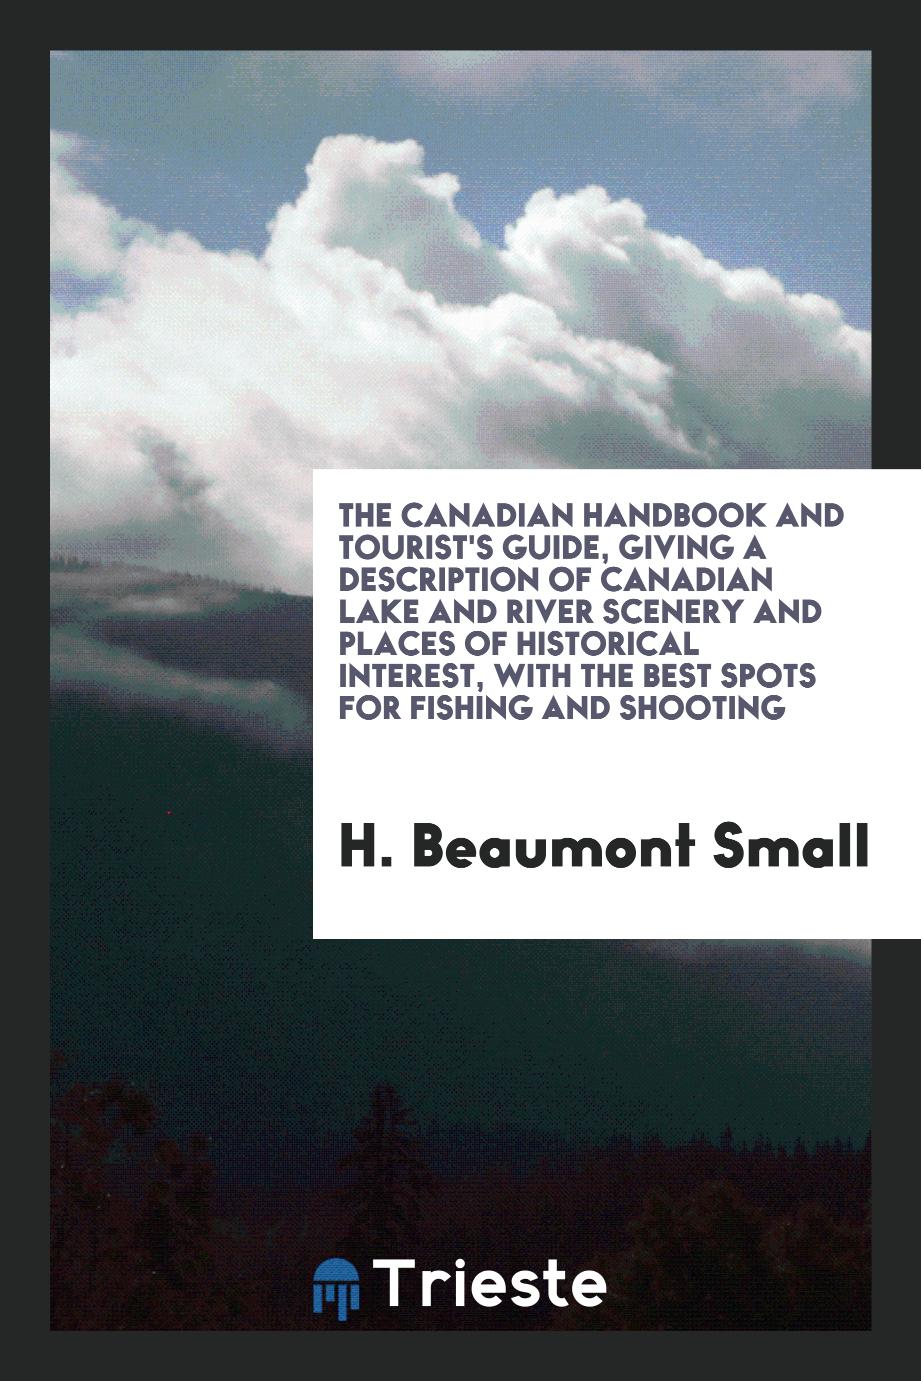 The Canadian handbook and tourist's guide, giving a description of Canadian lake and river scenery and places of historical interest, with the best spots for fishing and shooting